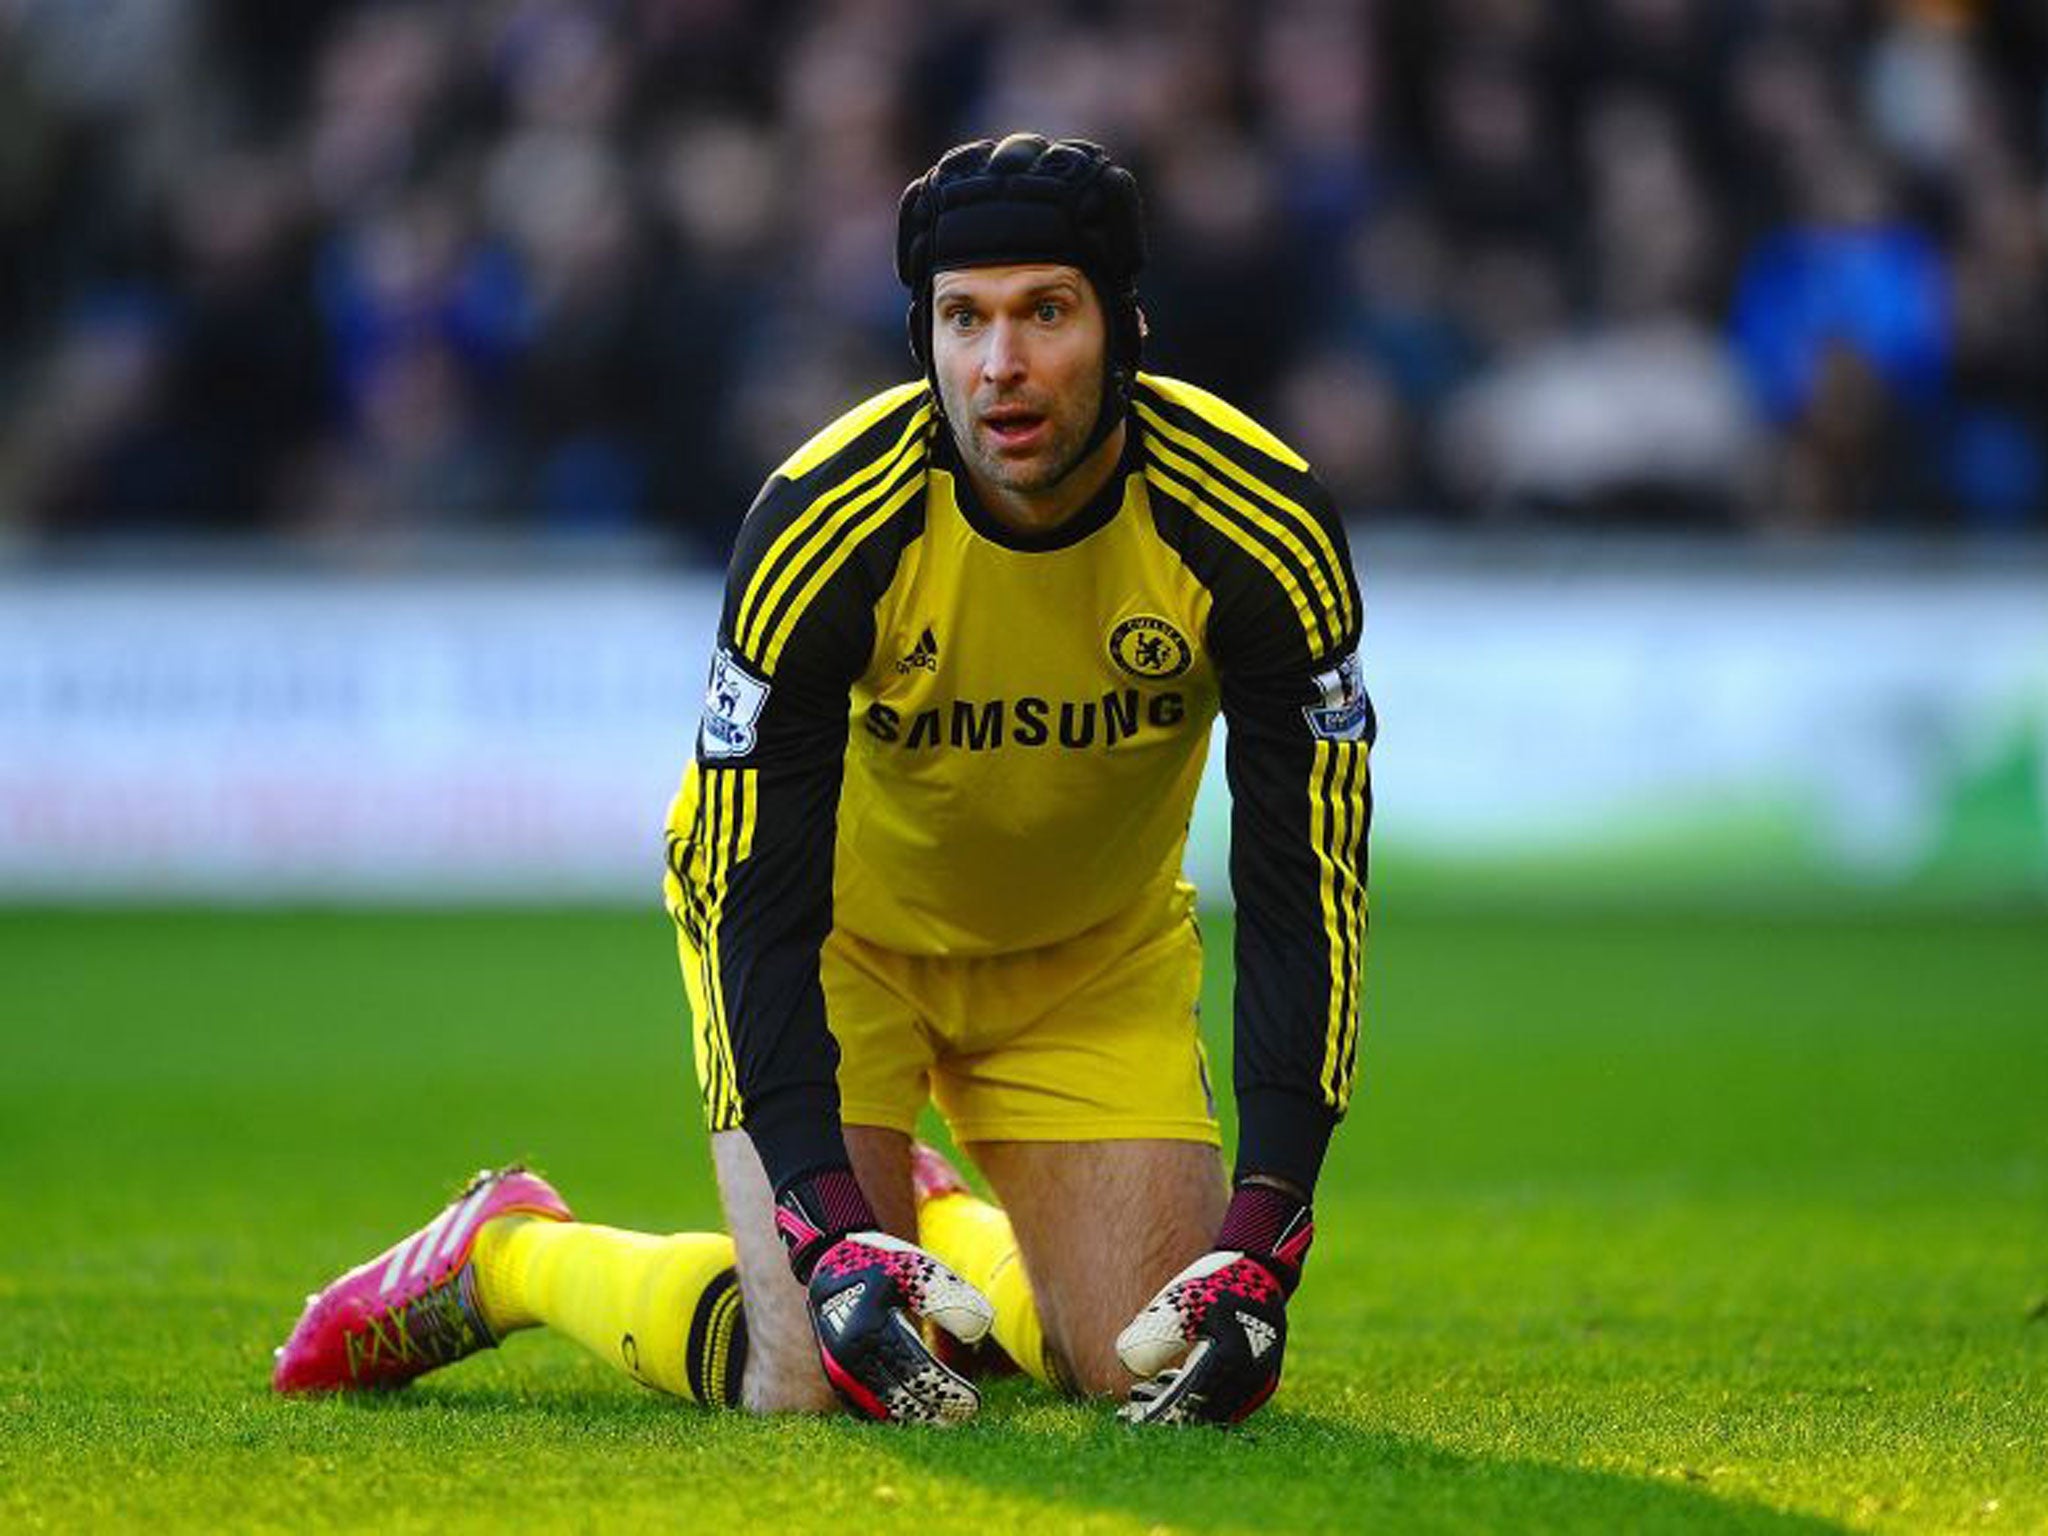 Petr Cech: Early mistake almost let in Navas but strong presence thereafter, with majority of action at other end of the pitch. Great save from Jovetic. 7/10